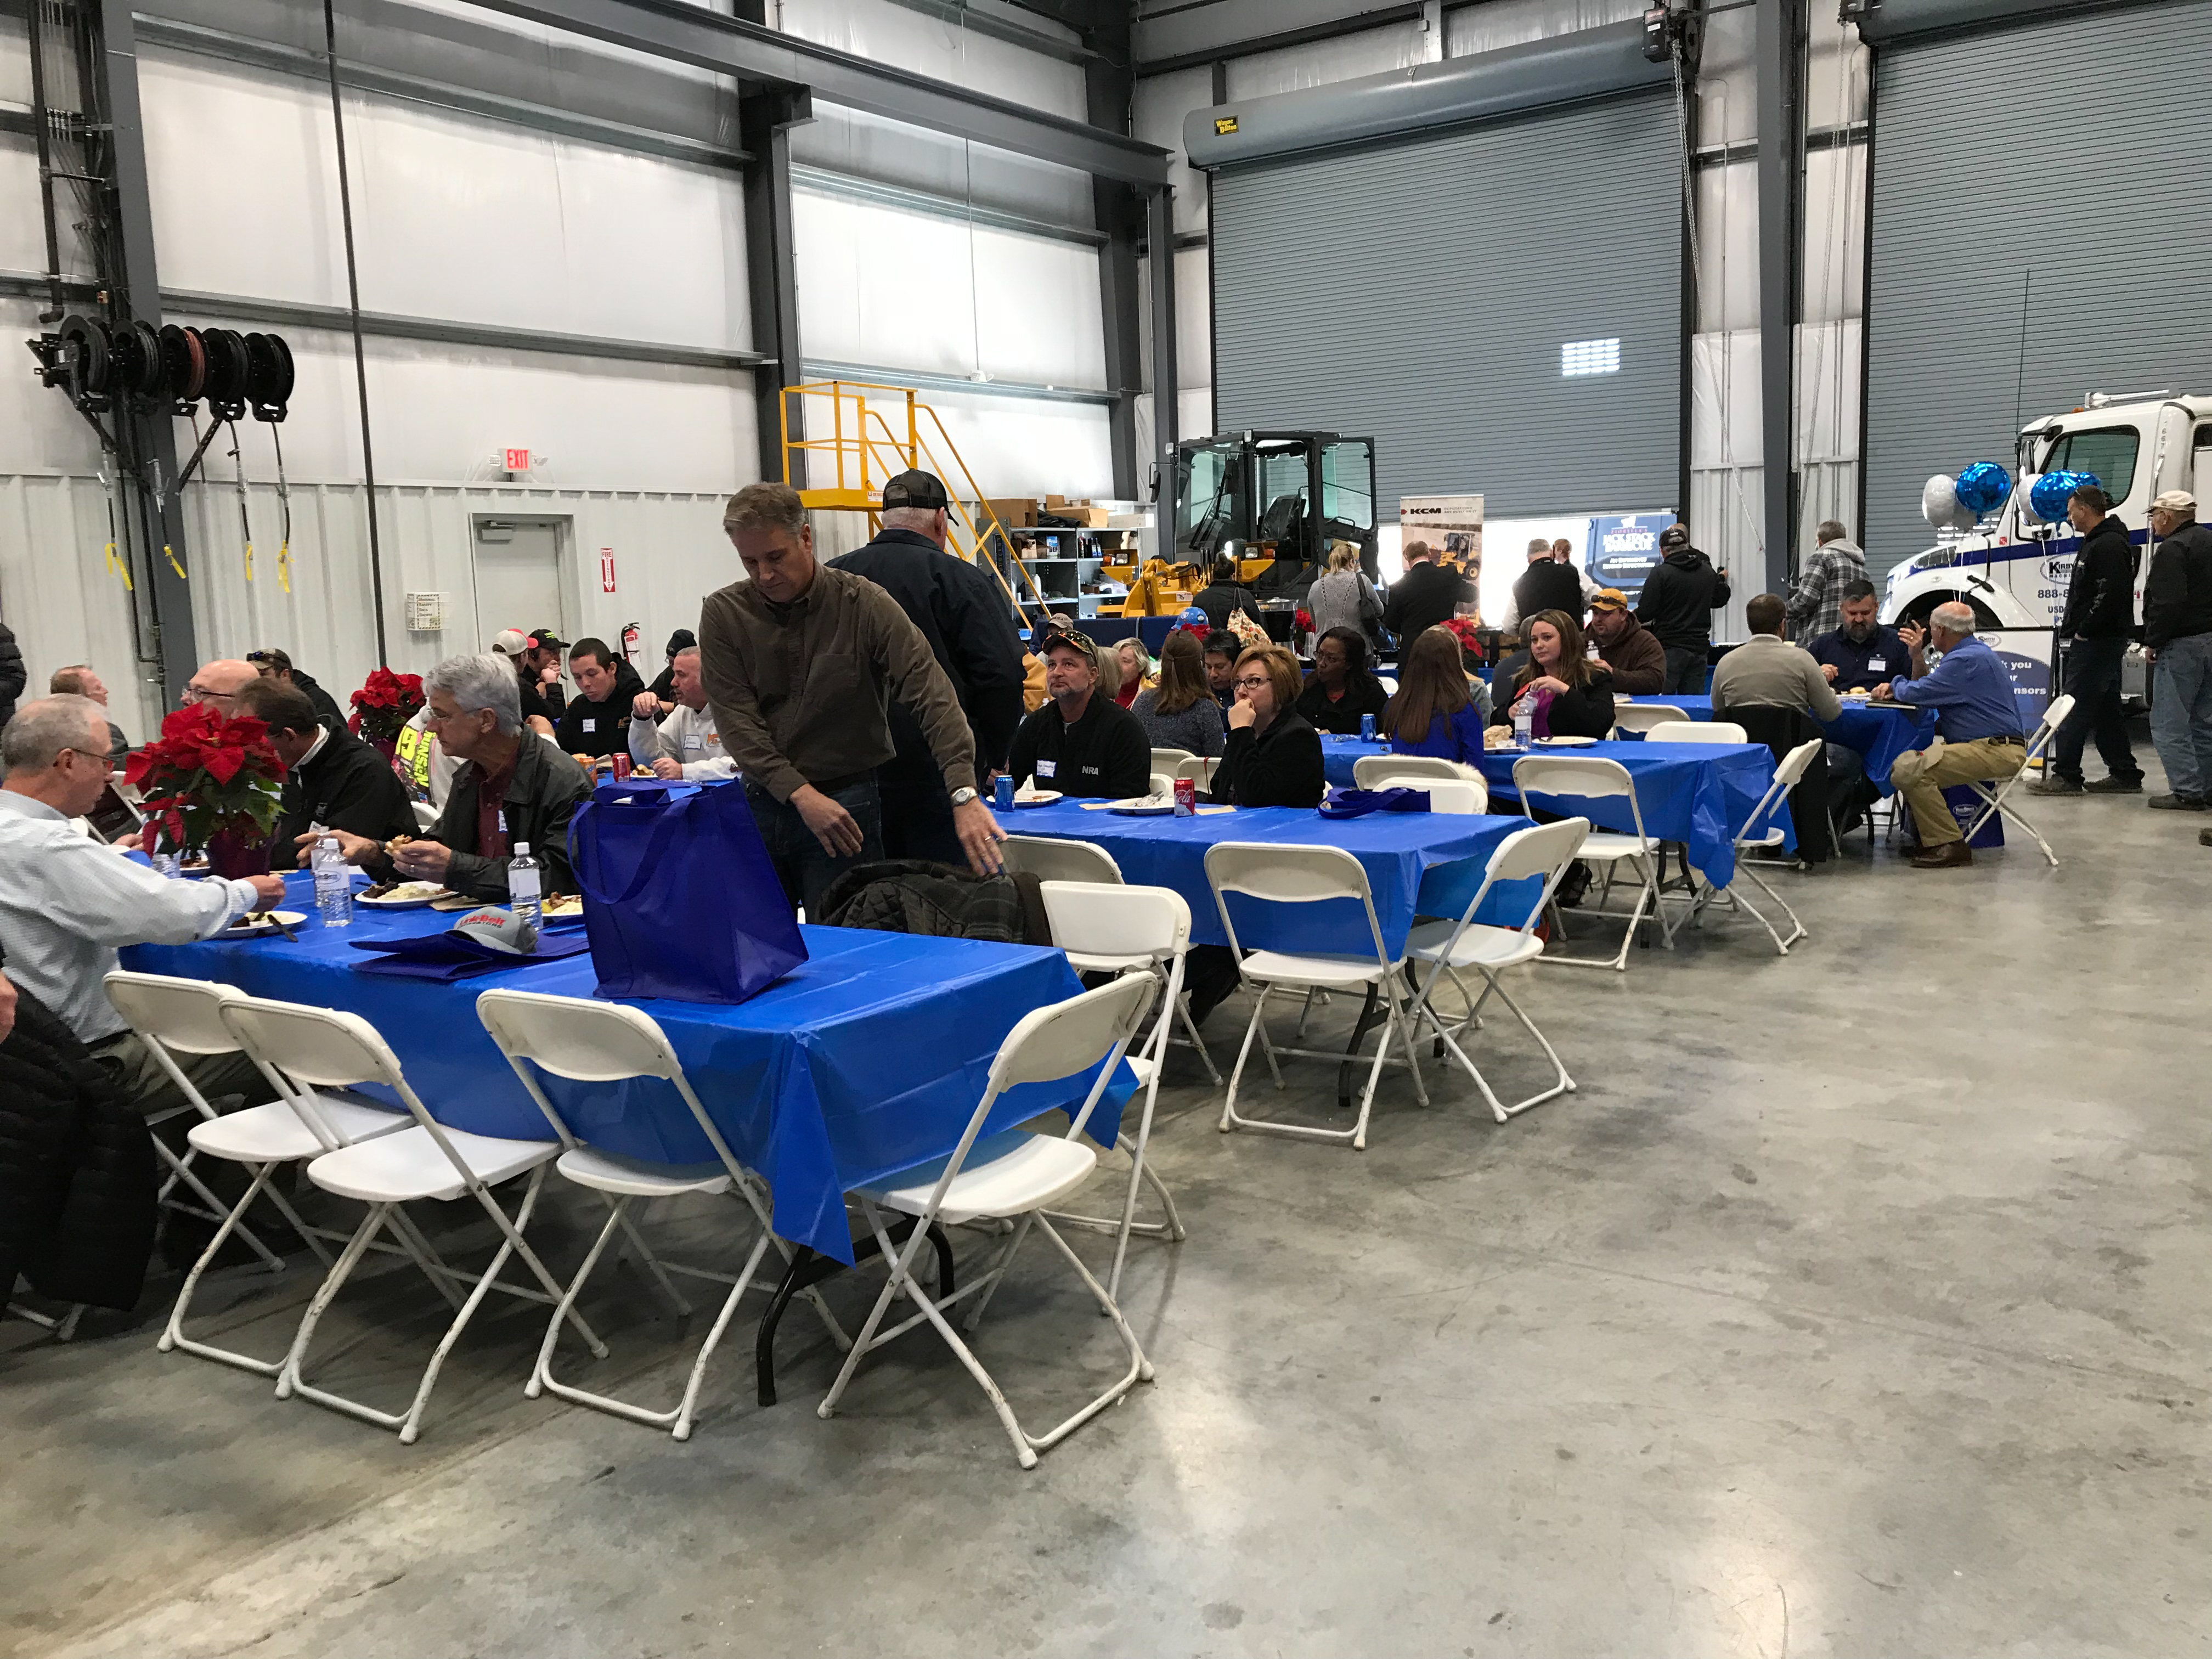 Kirby-Smith Machinery celebrated the grand opening of its new Kansas City location with an open house event on December 6th of 2017. The new addition brings the Oklahoma City-based company’s total locations to 10. The event featured a ribbon cutting ceremony and promotion of the Manitowoc, Grove and National Crane brands.